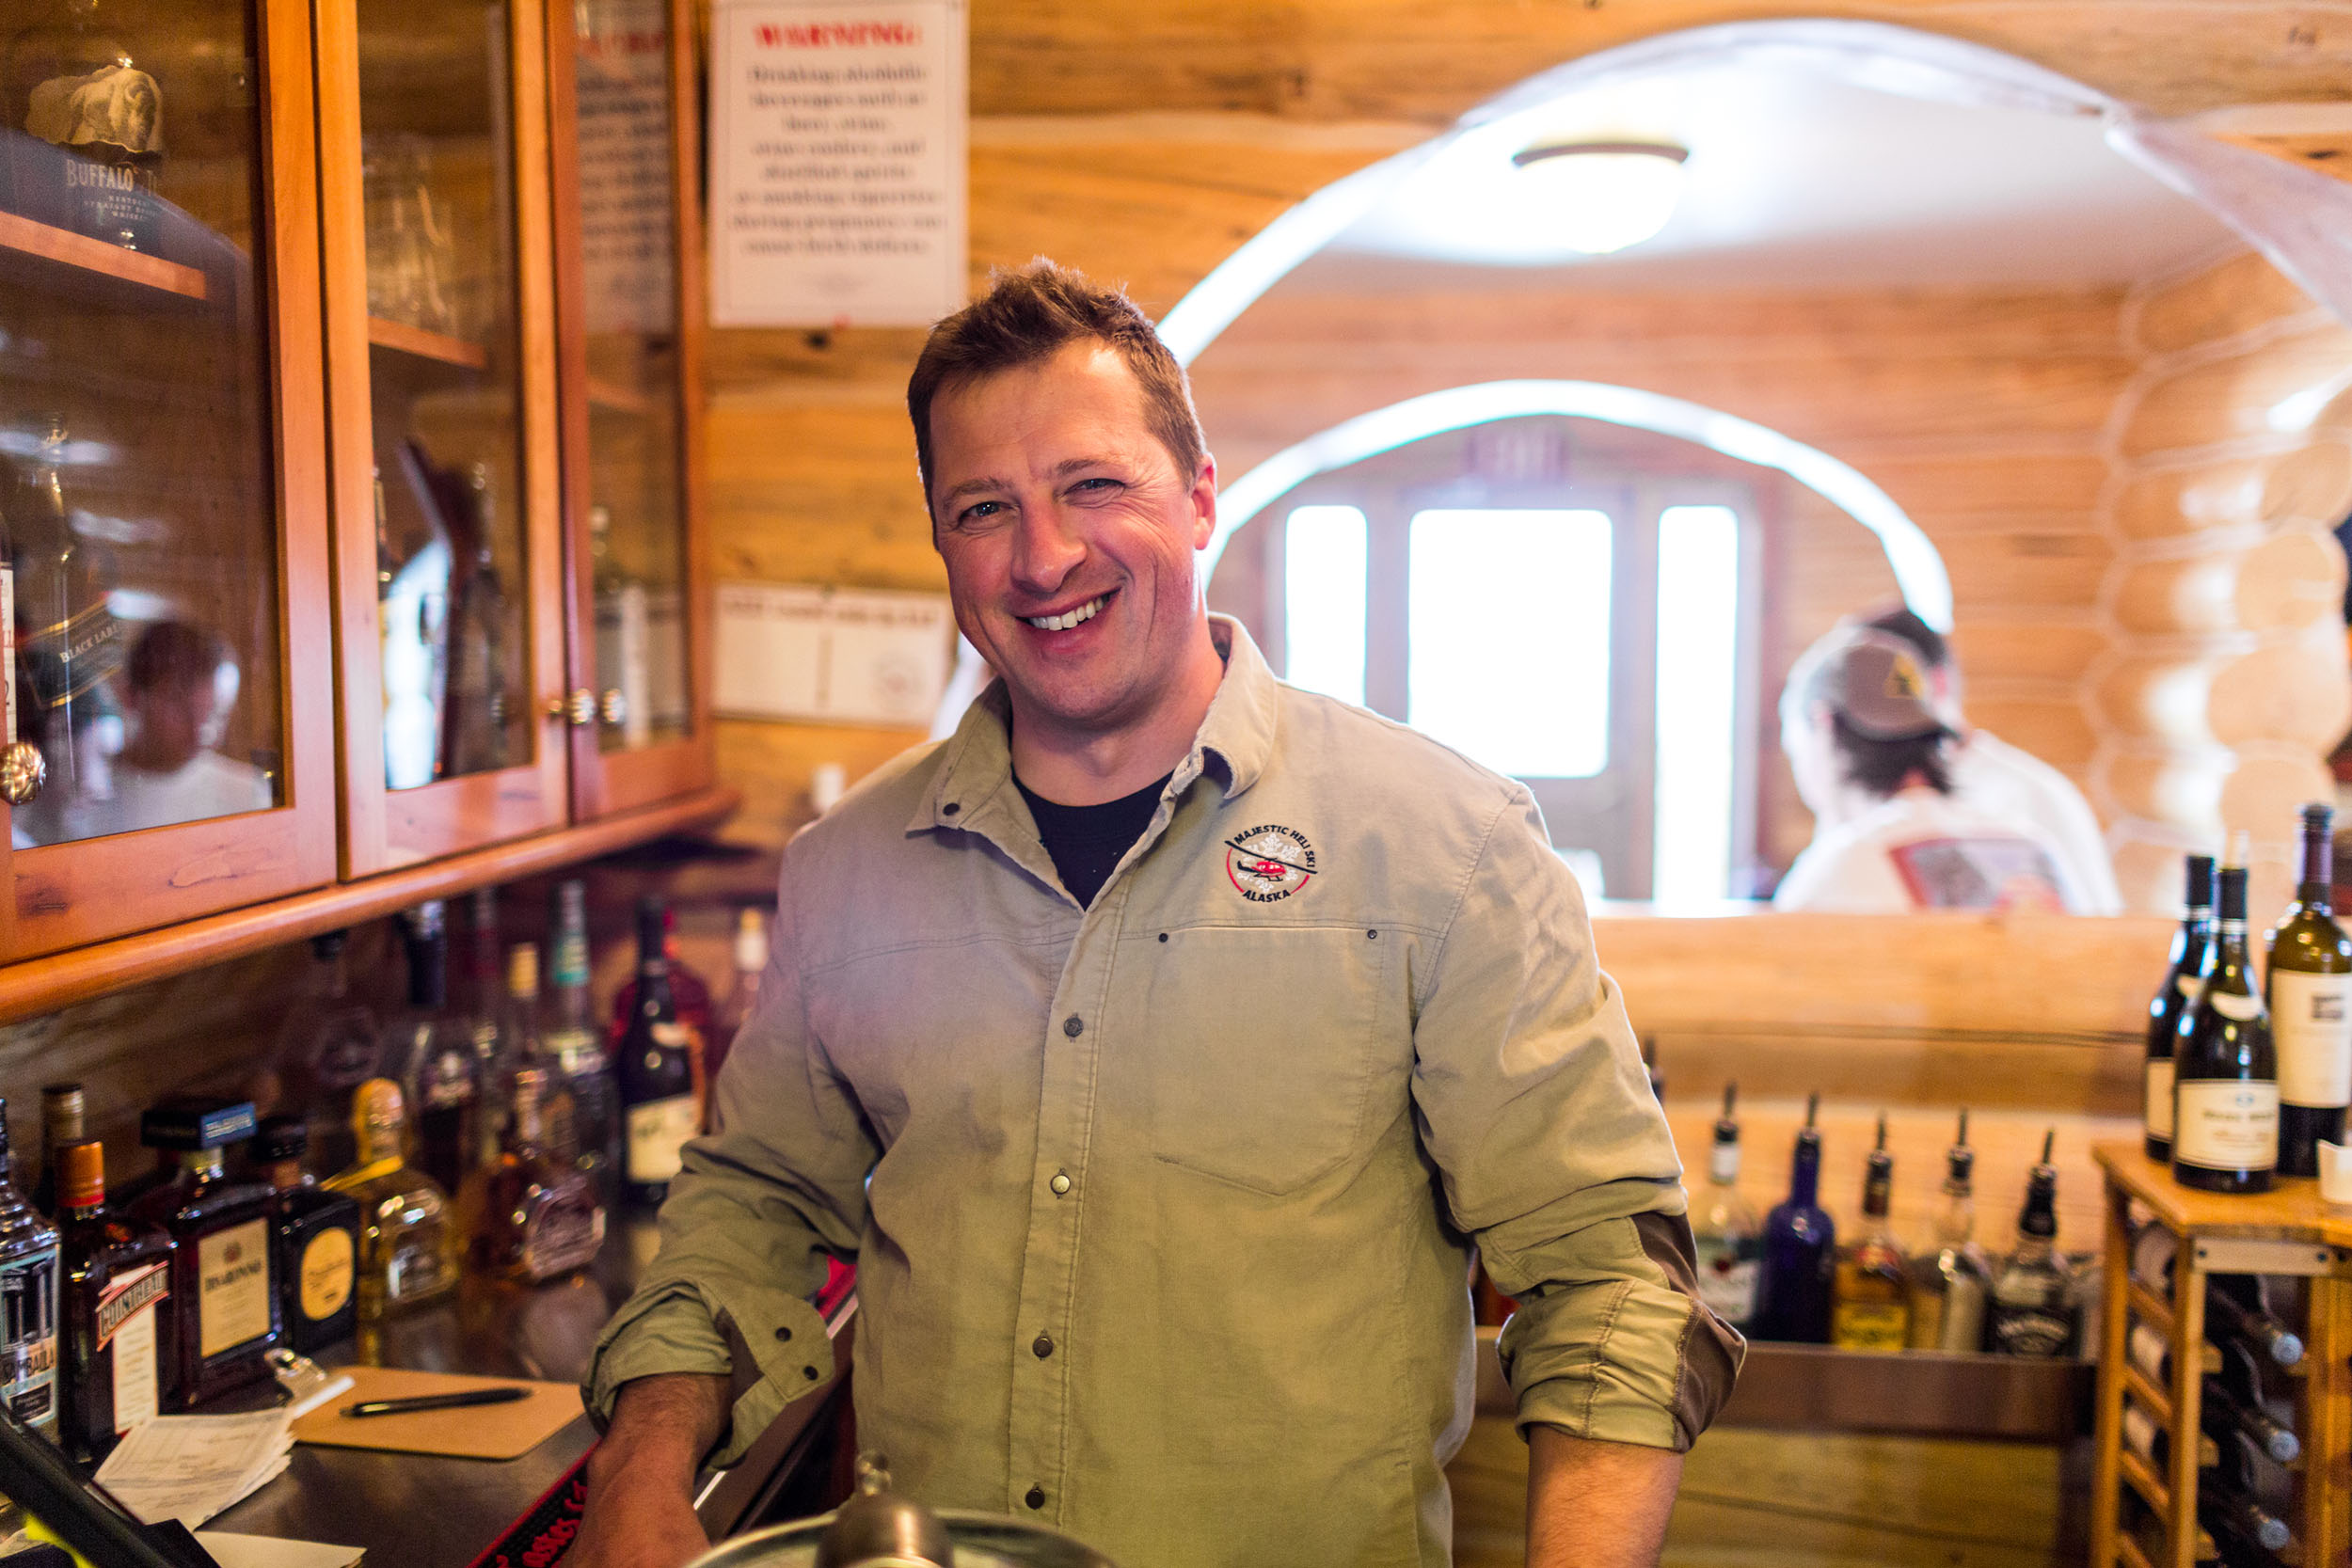 Njord standing behind the bar at Majestic Heli Ski